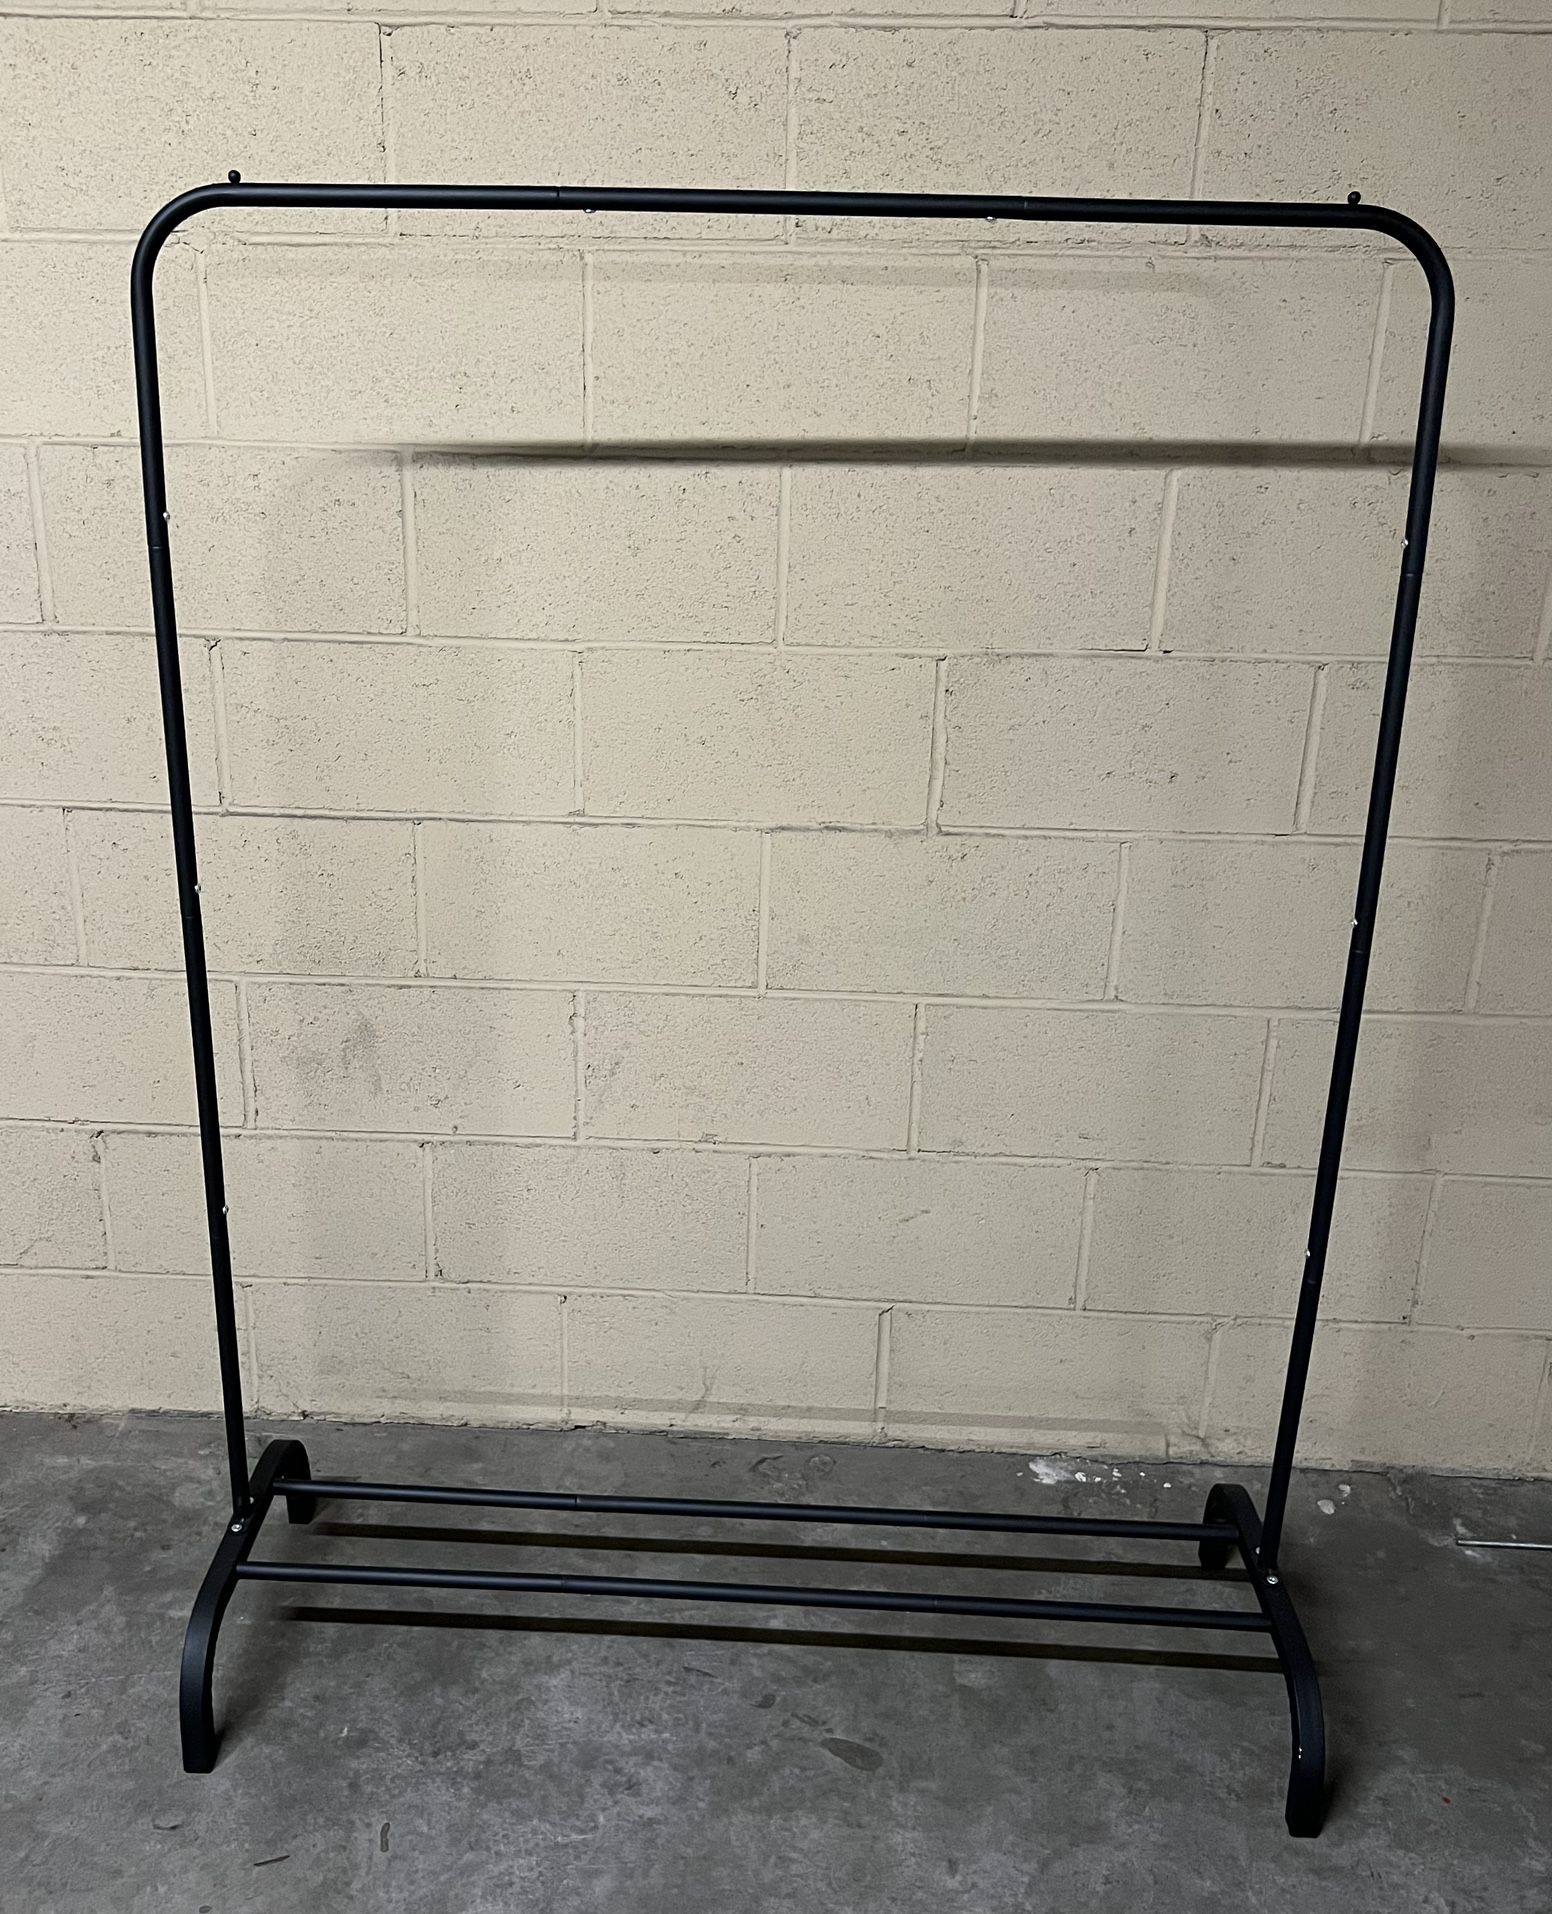 Garment Rack 43.5” W x 58” H, Base is 16” D. Can Put Shoes On Bottom. Stationary, Not On Wheels. 